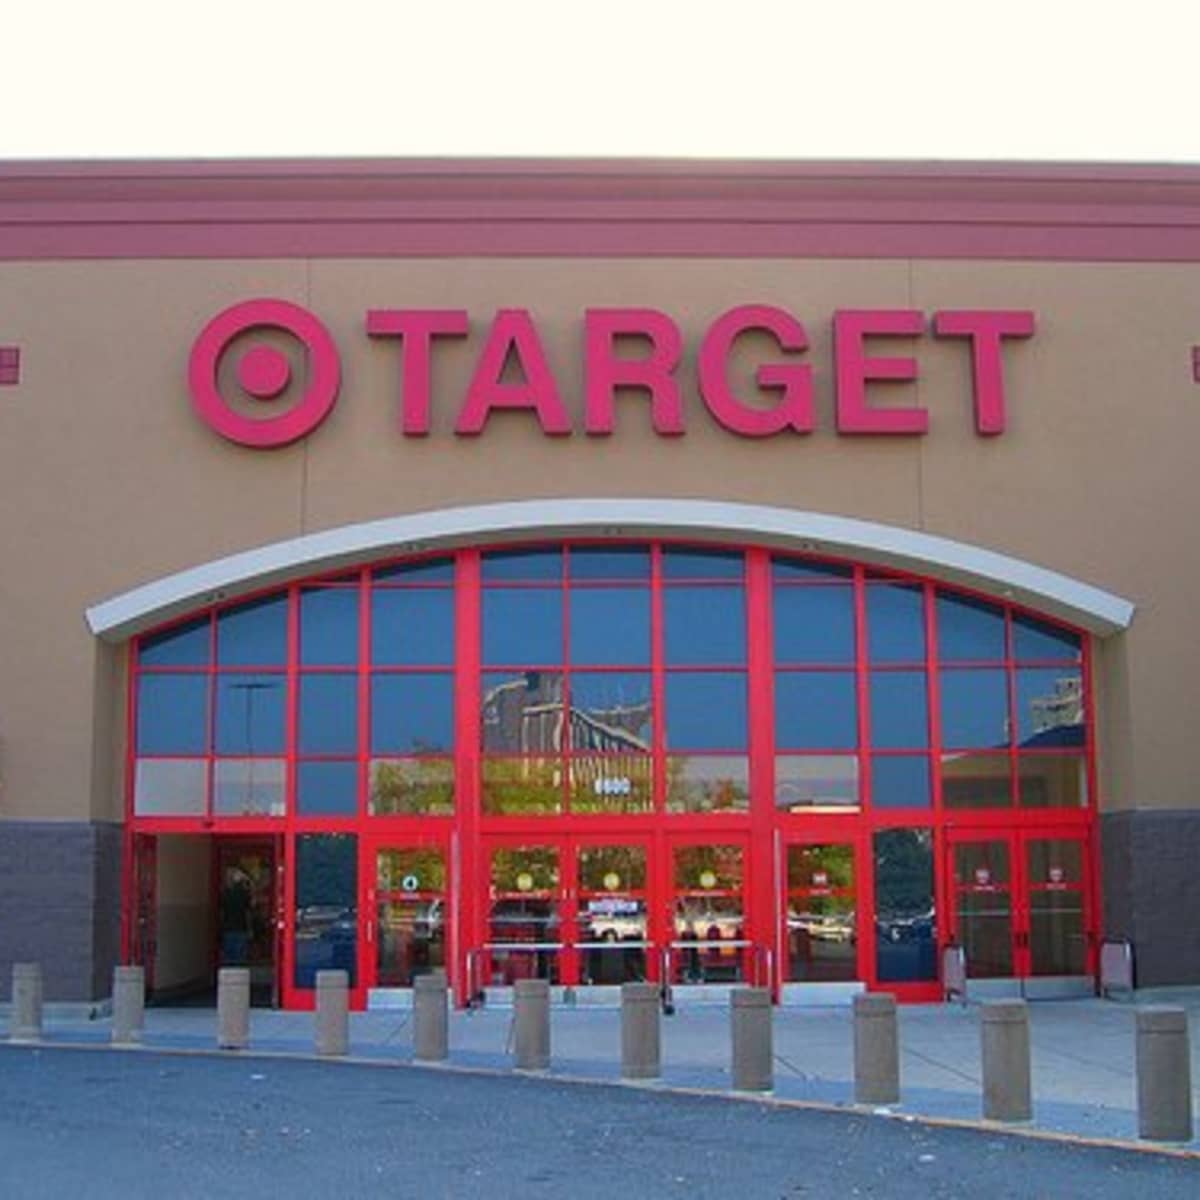 age to work at target in georgia